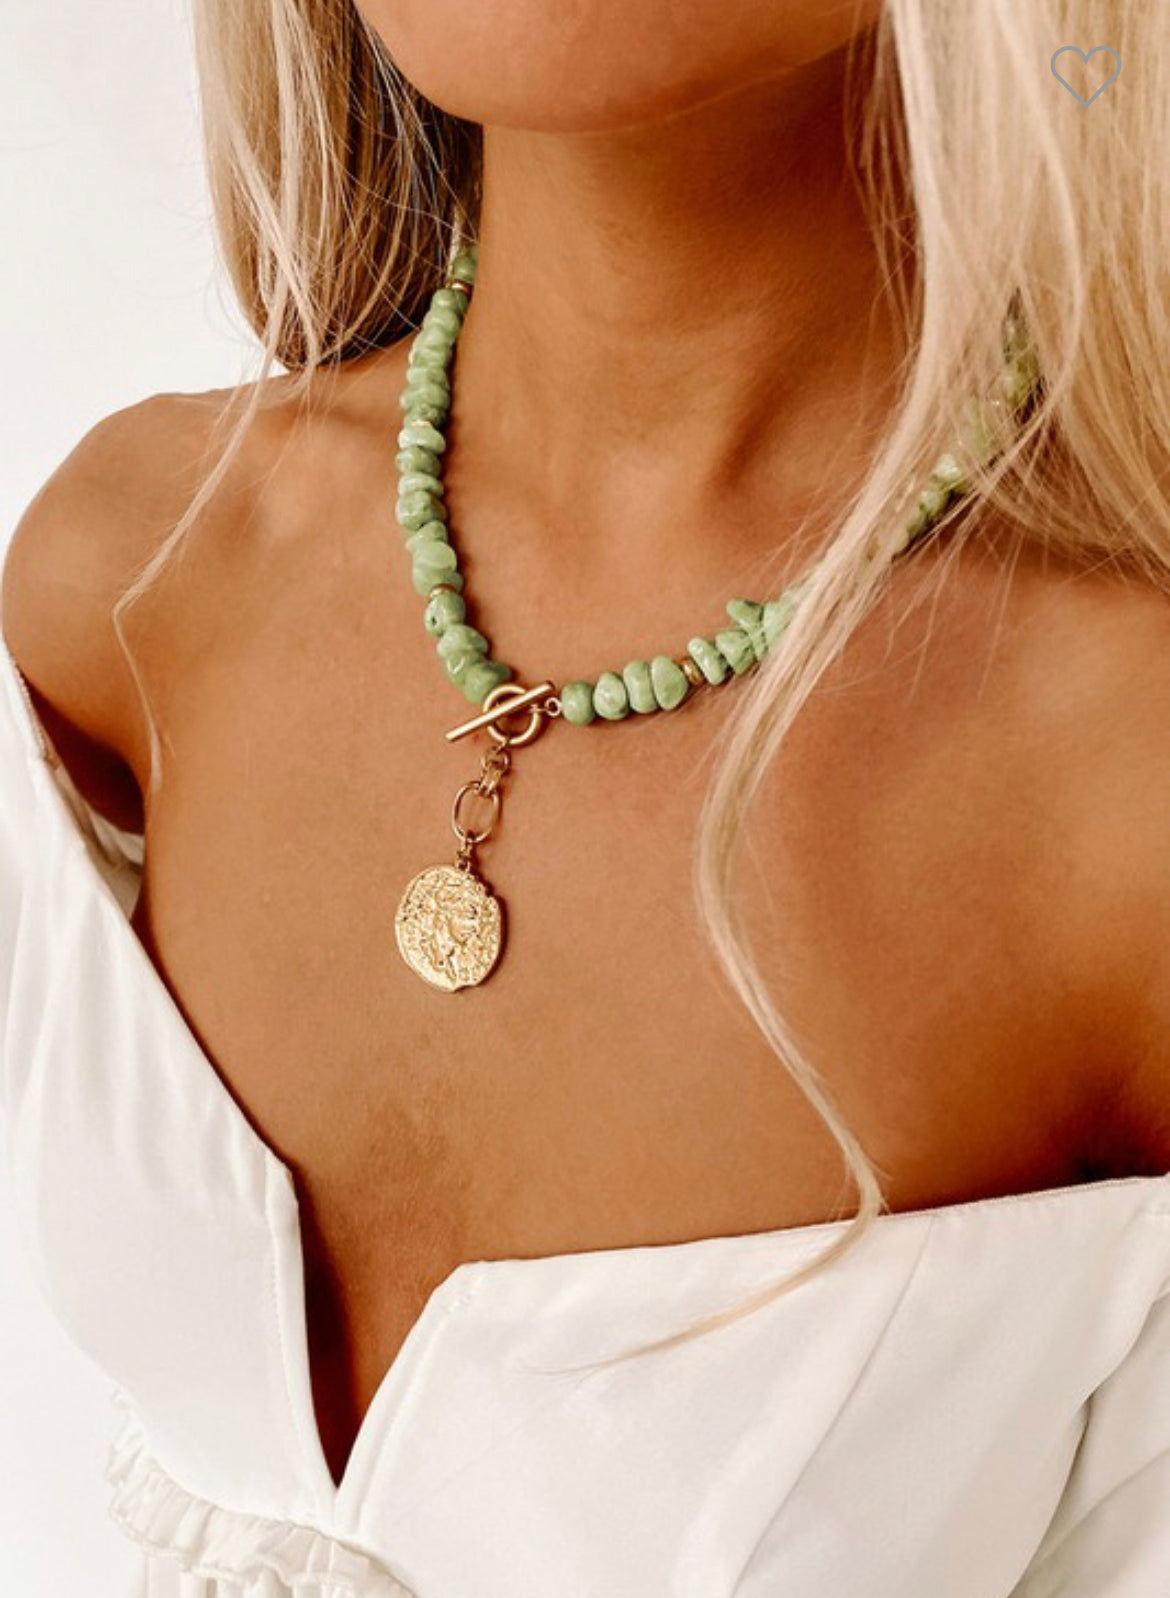 Green Pendant Necklace.